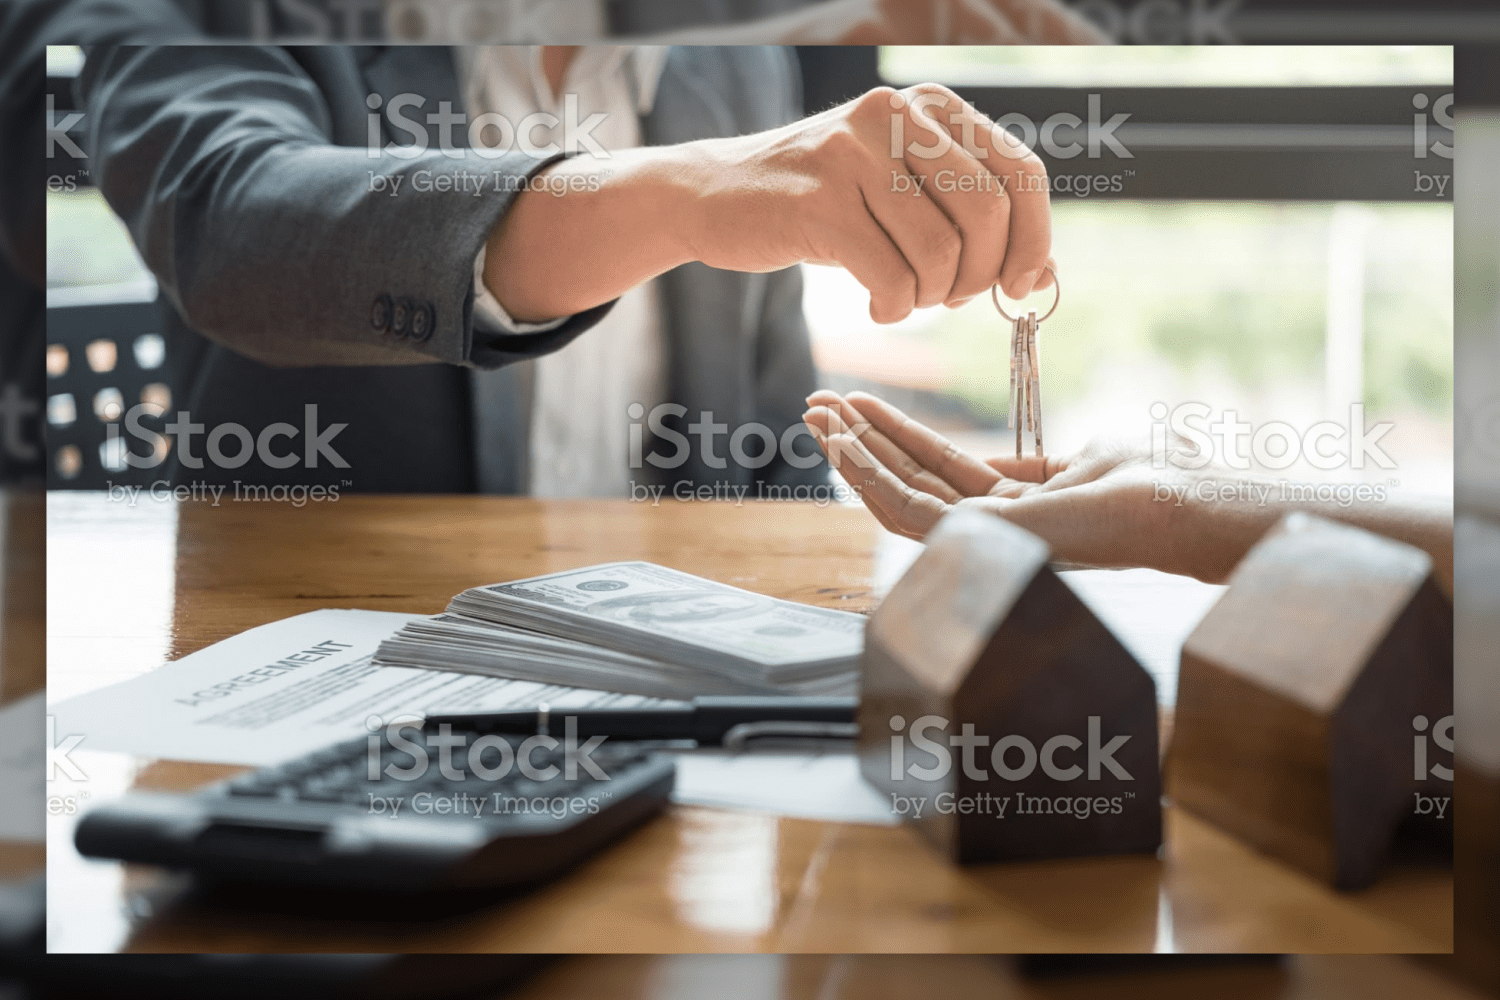 38 estate agent giving house keys to man in the office 505